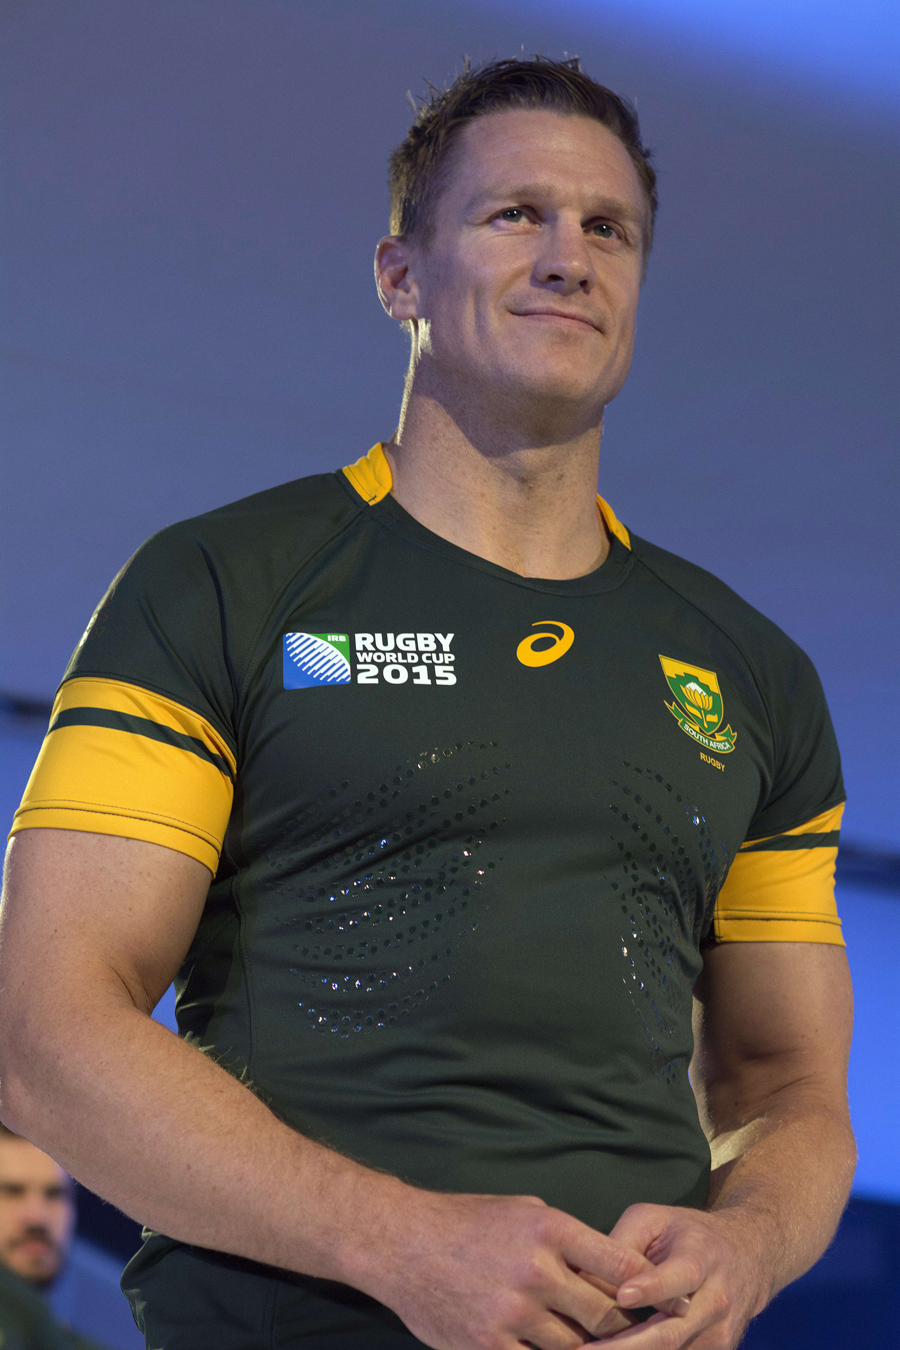 Jean de Villiers models South Africa's Rugby World Cup 2015 jumper